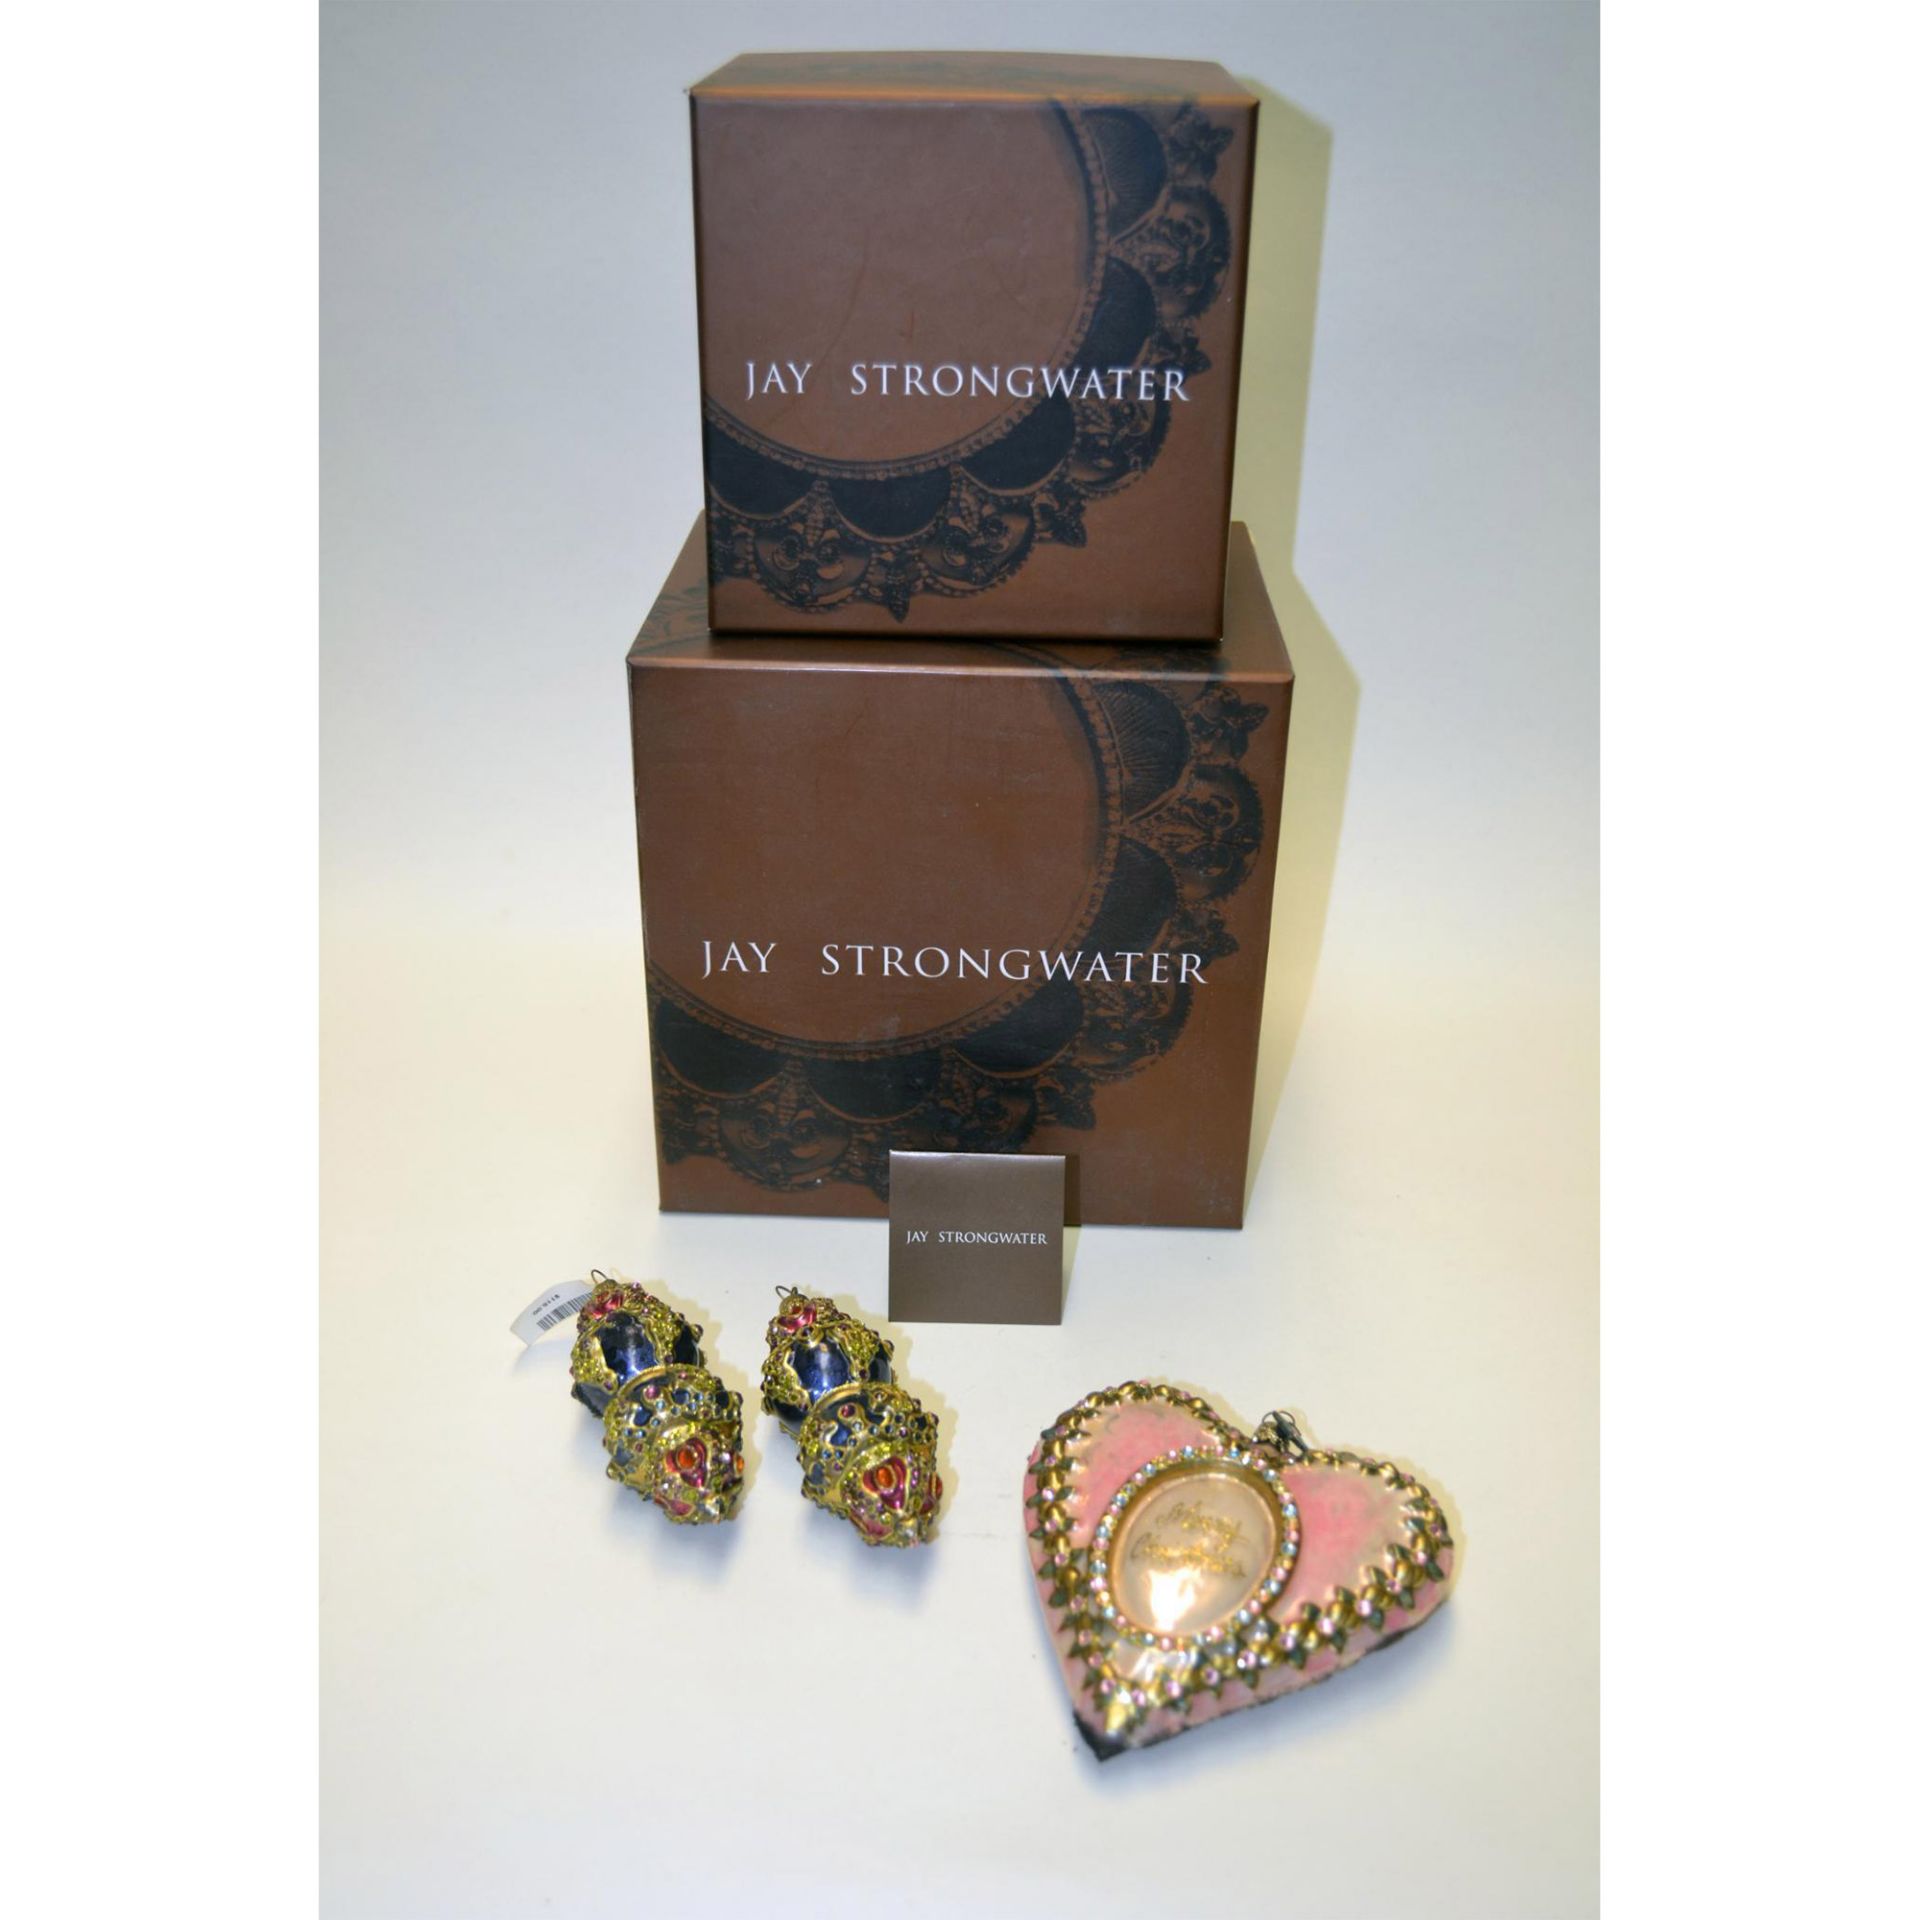 Jay Strongwater Vintage Decorative Ornaments, 3 Pcs - Image 2 of 6